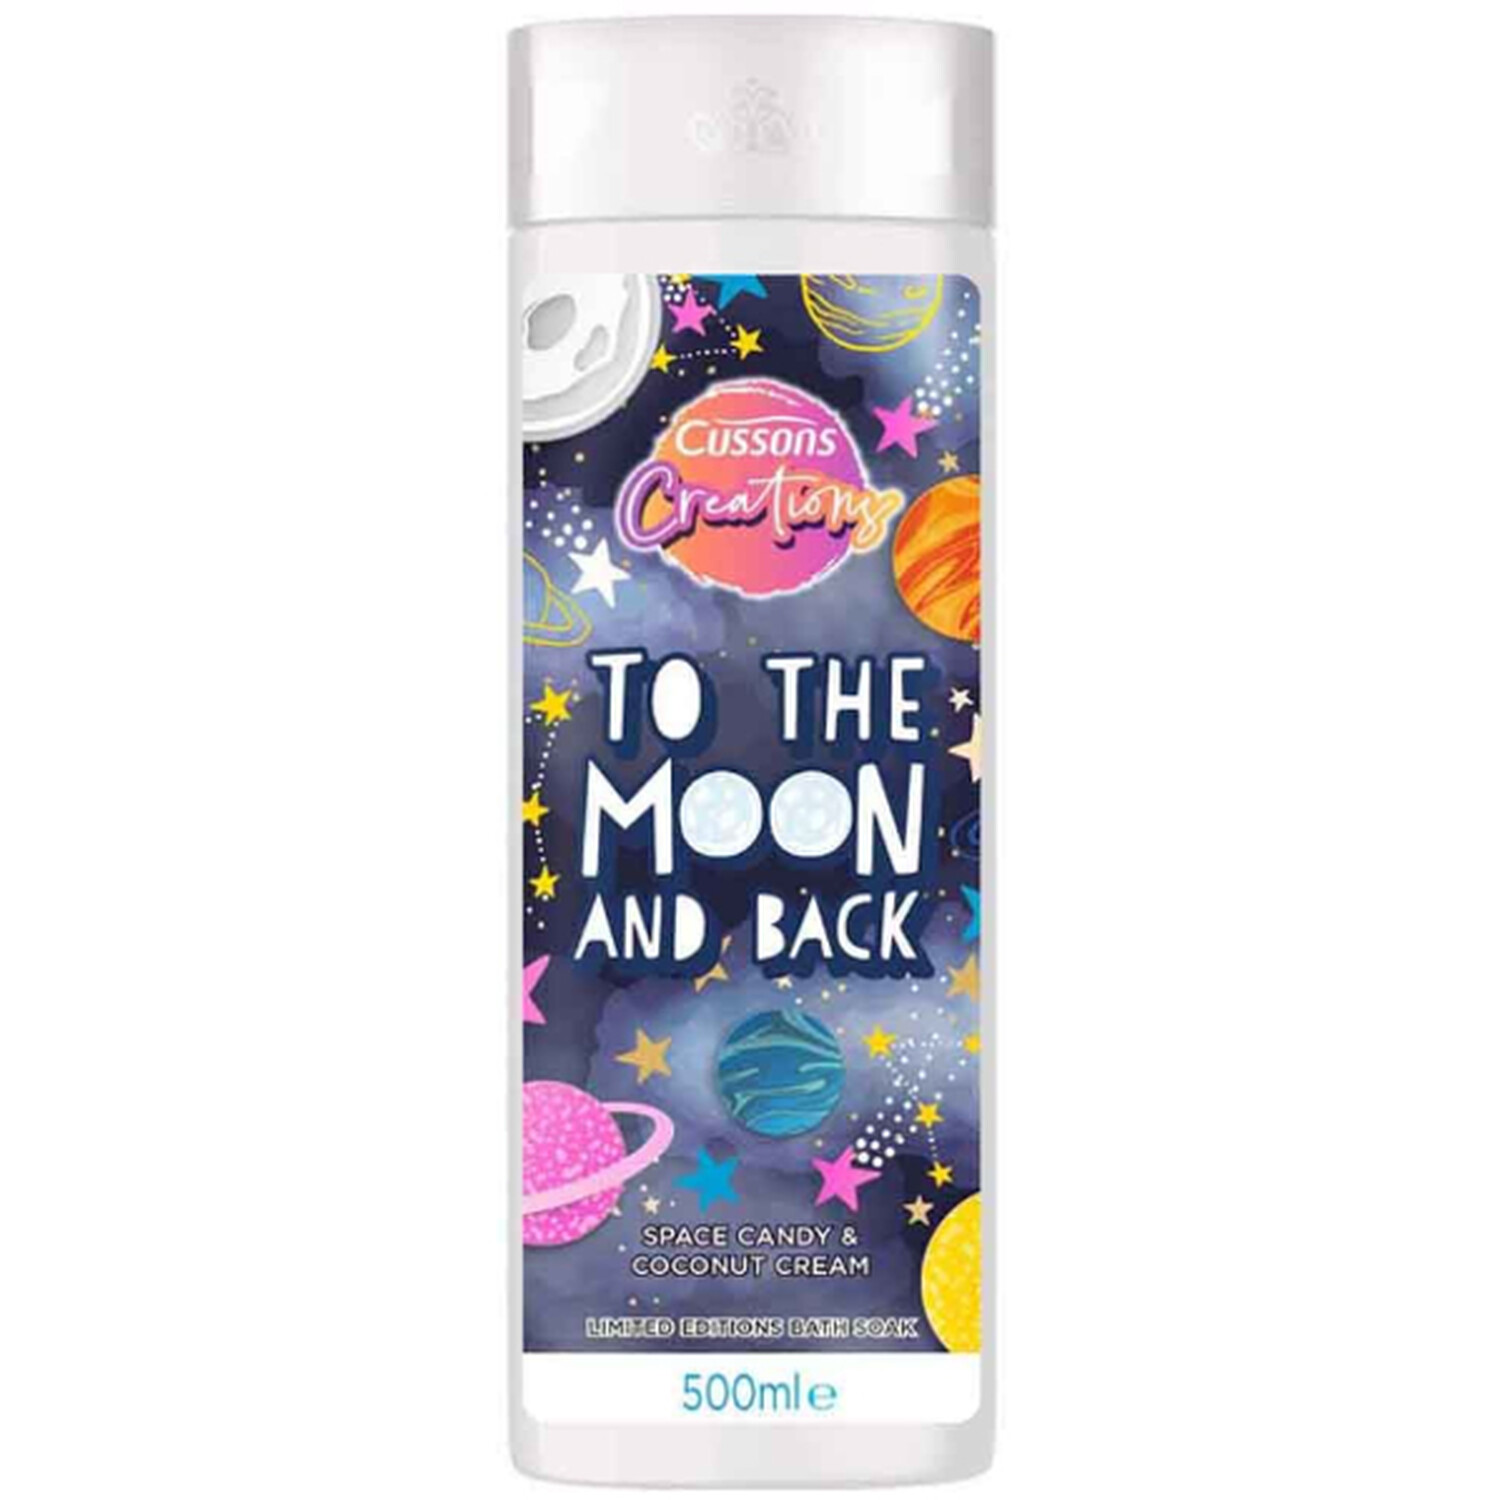 Cussons Creations To the Moon and Back Bath Soak - White Image